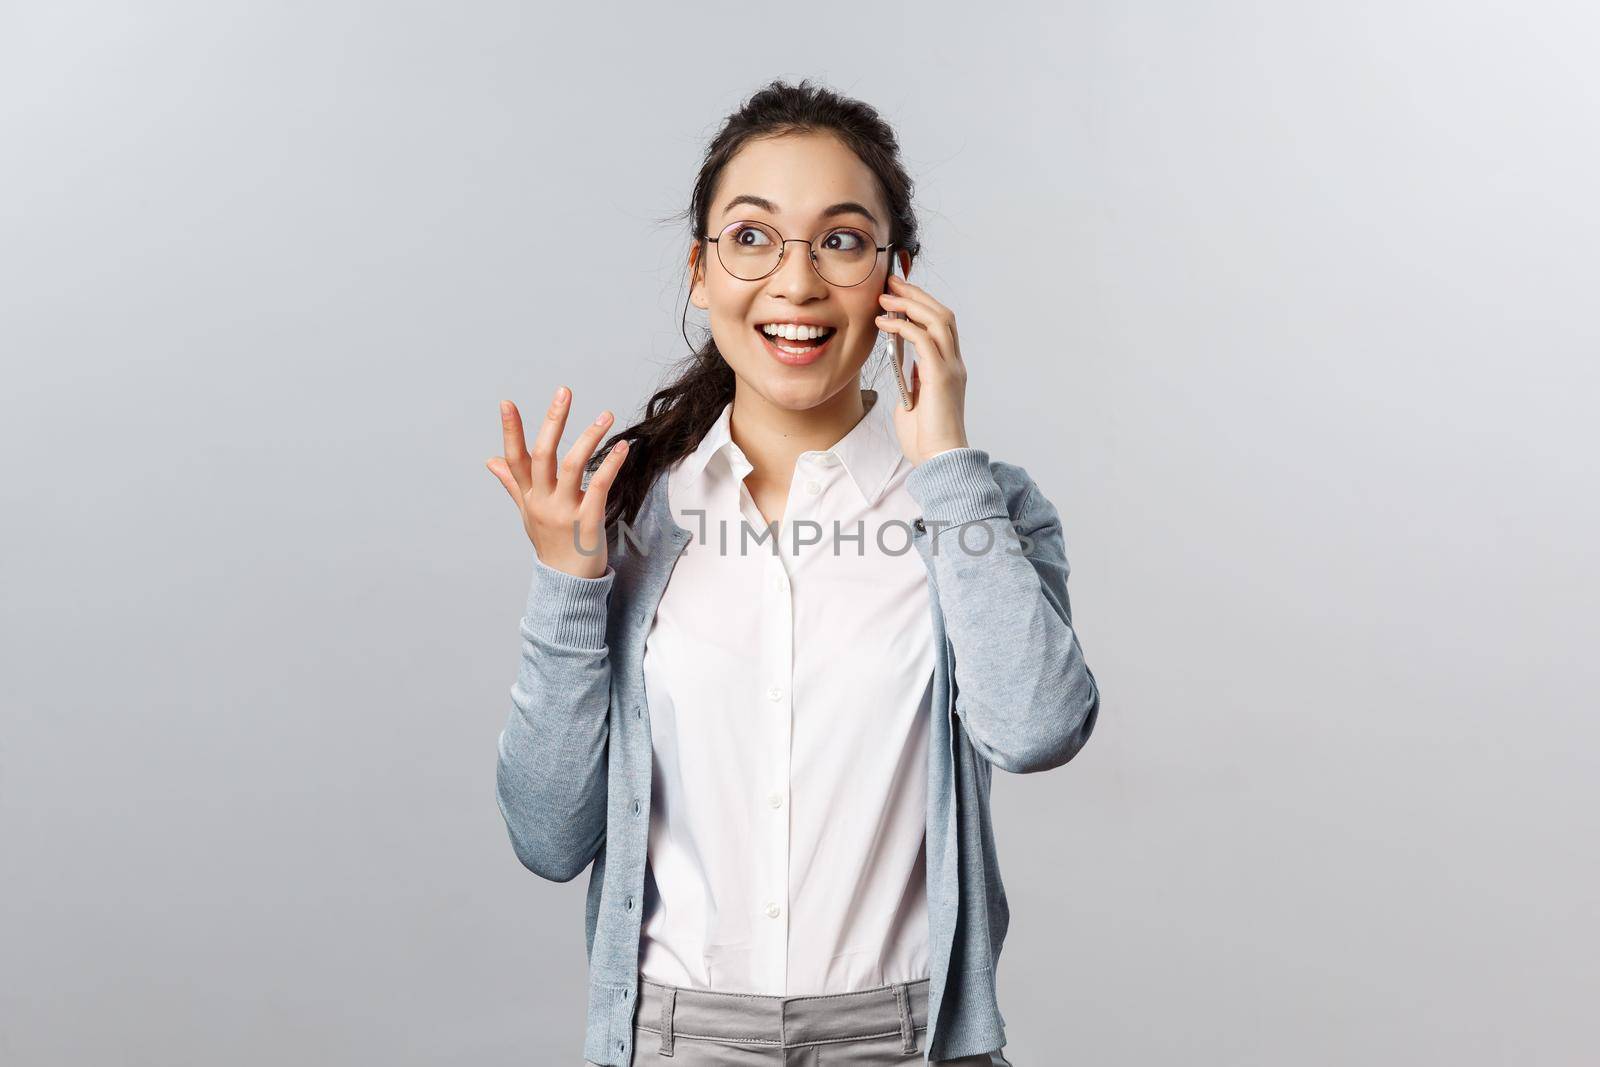 Office lifestyle, business and people concept. Talkative, amused good-looking asian woman in glasses discuss fresh gossips and news on phone, gesturing passionately talking with upbeat smile.